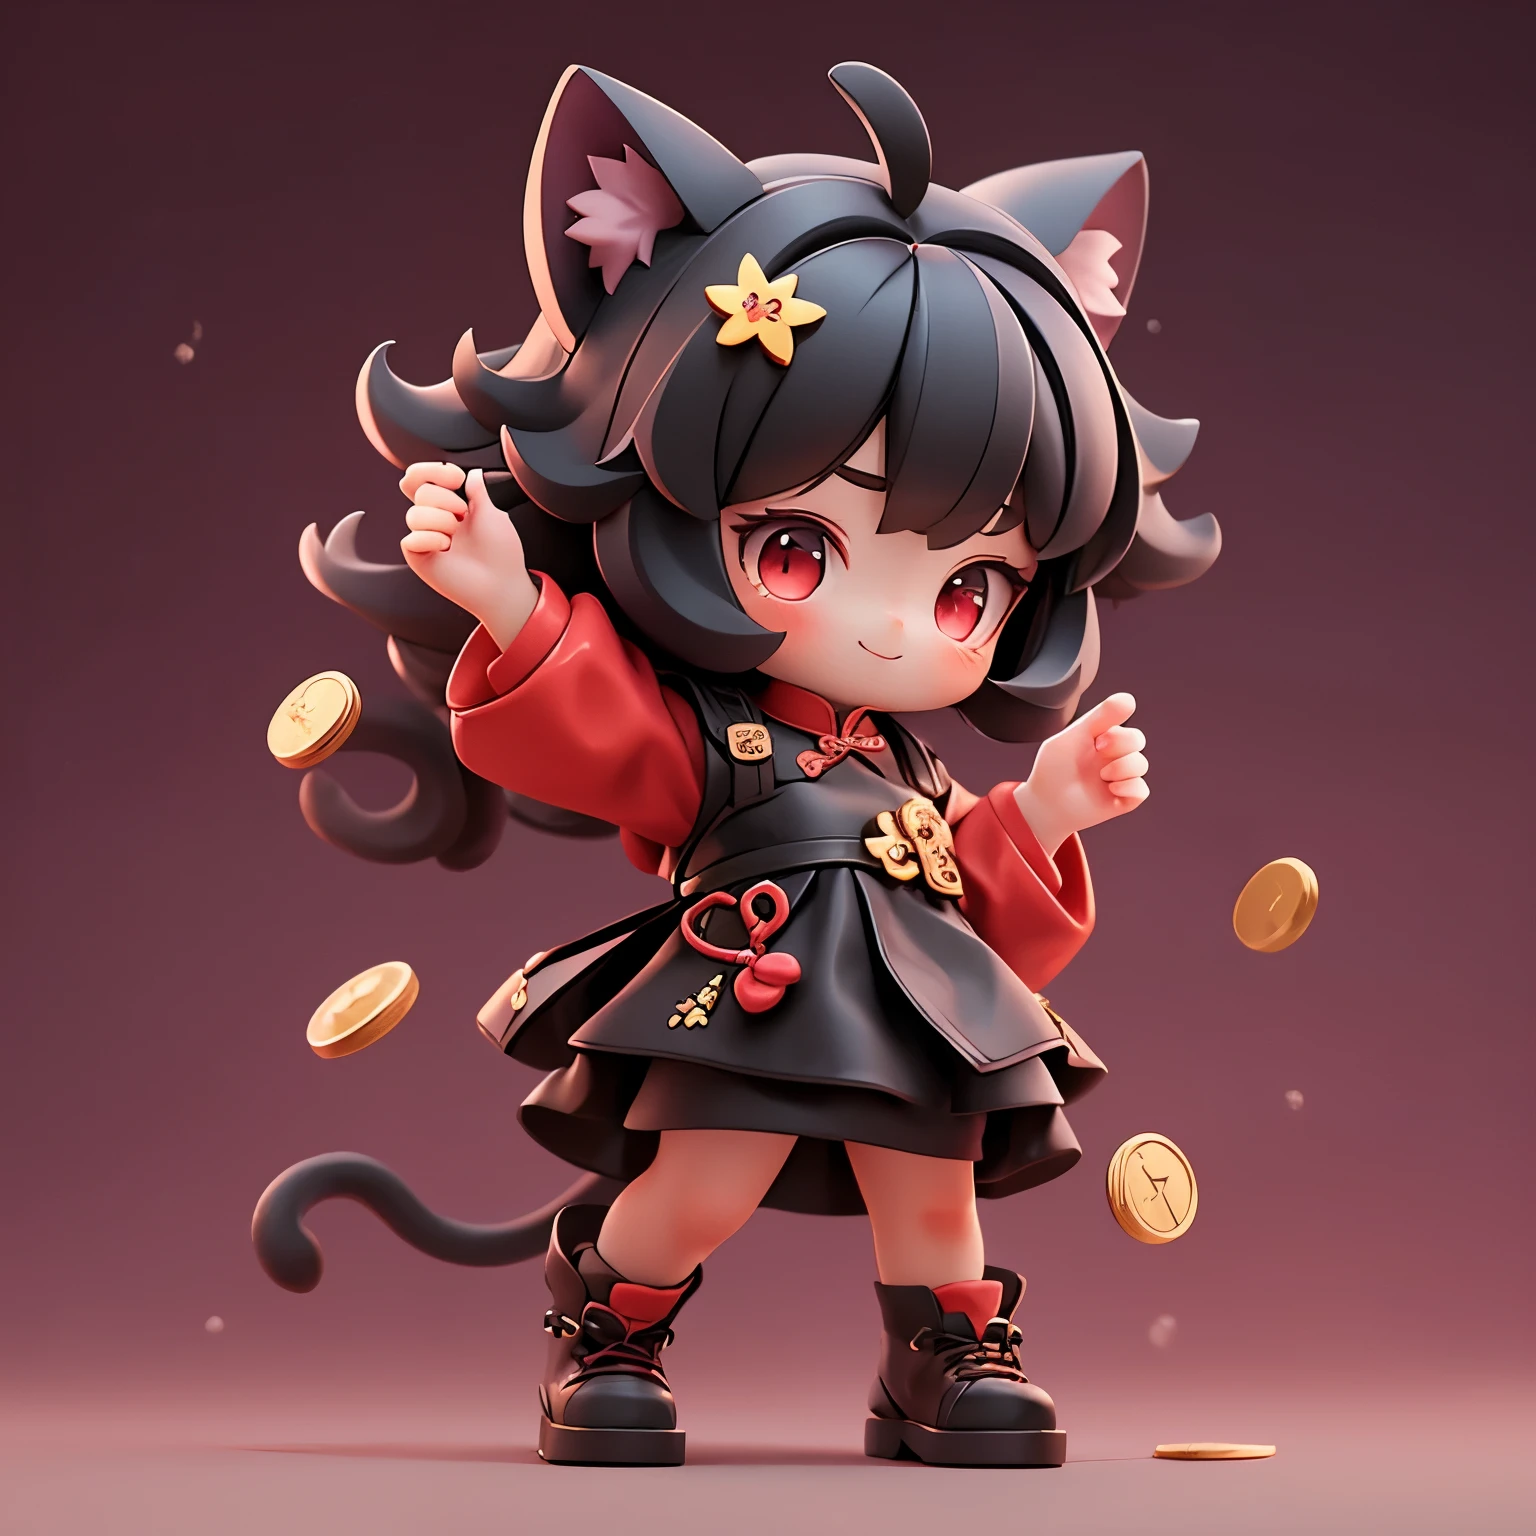 MAtte blind box，(Red cheongsAm)，Simple bAckground，best quAlity,CAt eArs,HAppy expression,Throwing gold coins in hAnd,stAnding,A ,blAck hAir,红眼睛
